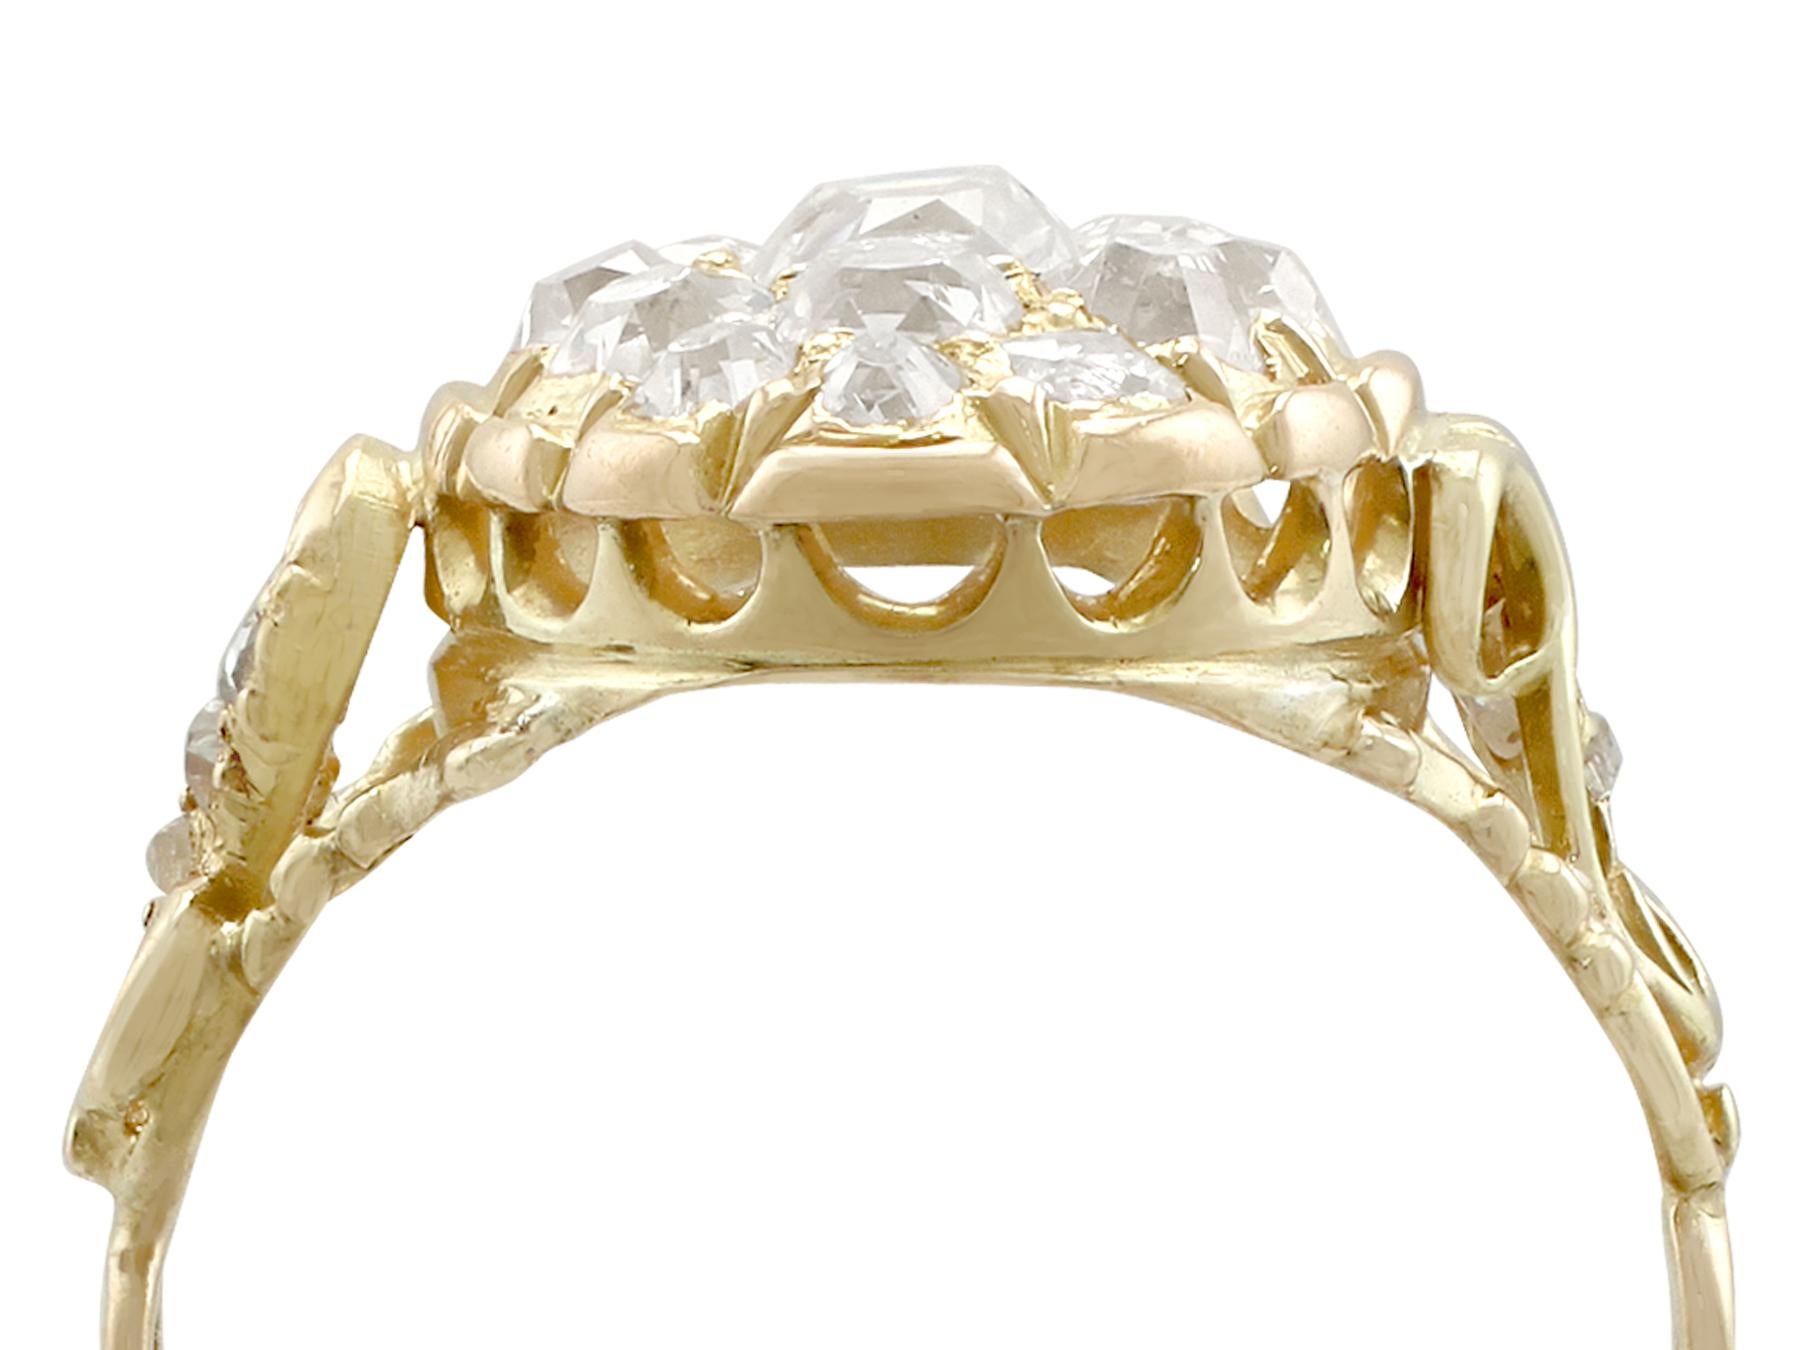 An impressive antique Victorian 1.51 carat diamond and 18 karat yellow gold marquise shaped dress ring; part of our diverse antique jewellery and estate jewelry collections.

This fine and impressive antique Victorian diamond ring has been crafted